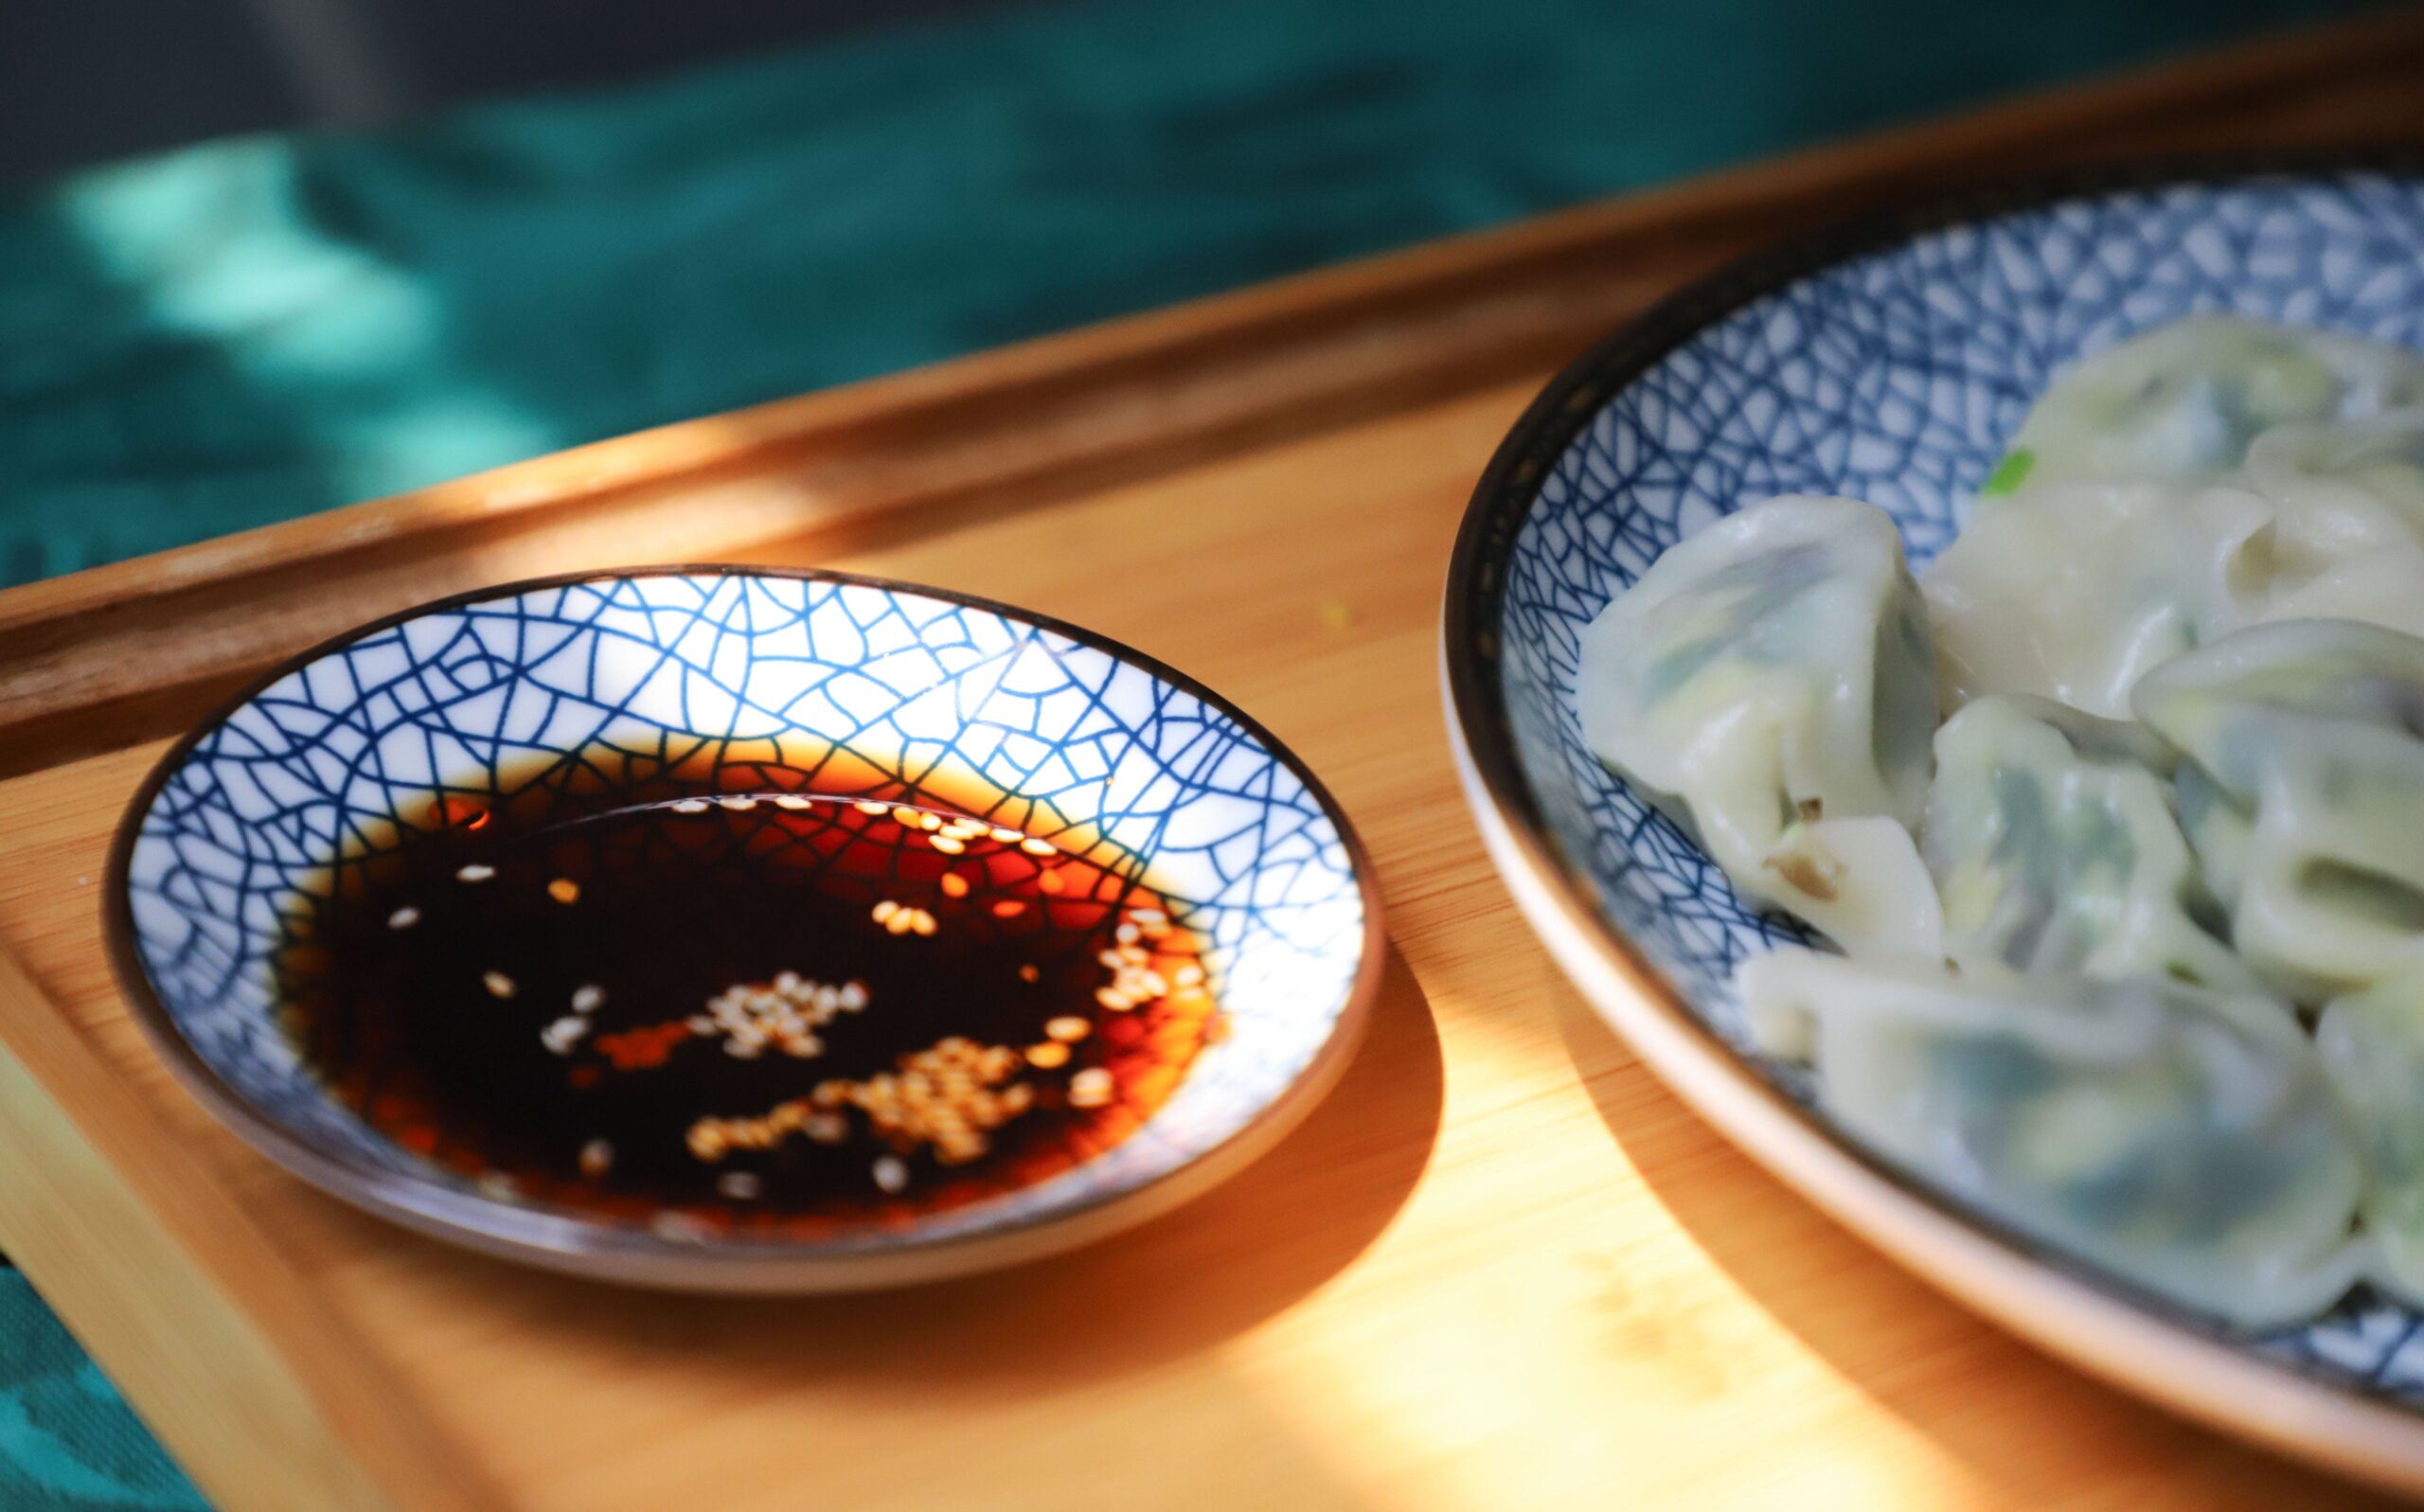 Choganjang (Vinegared soy sauce with sesame)